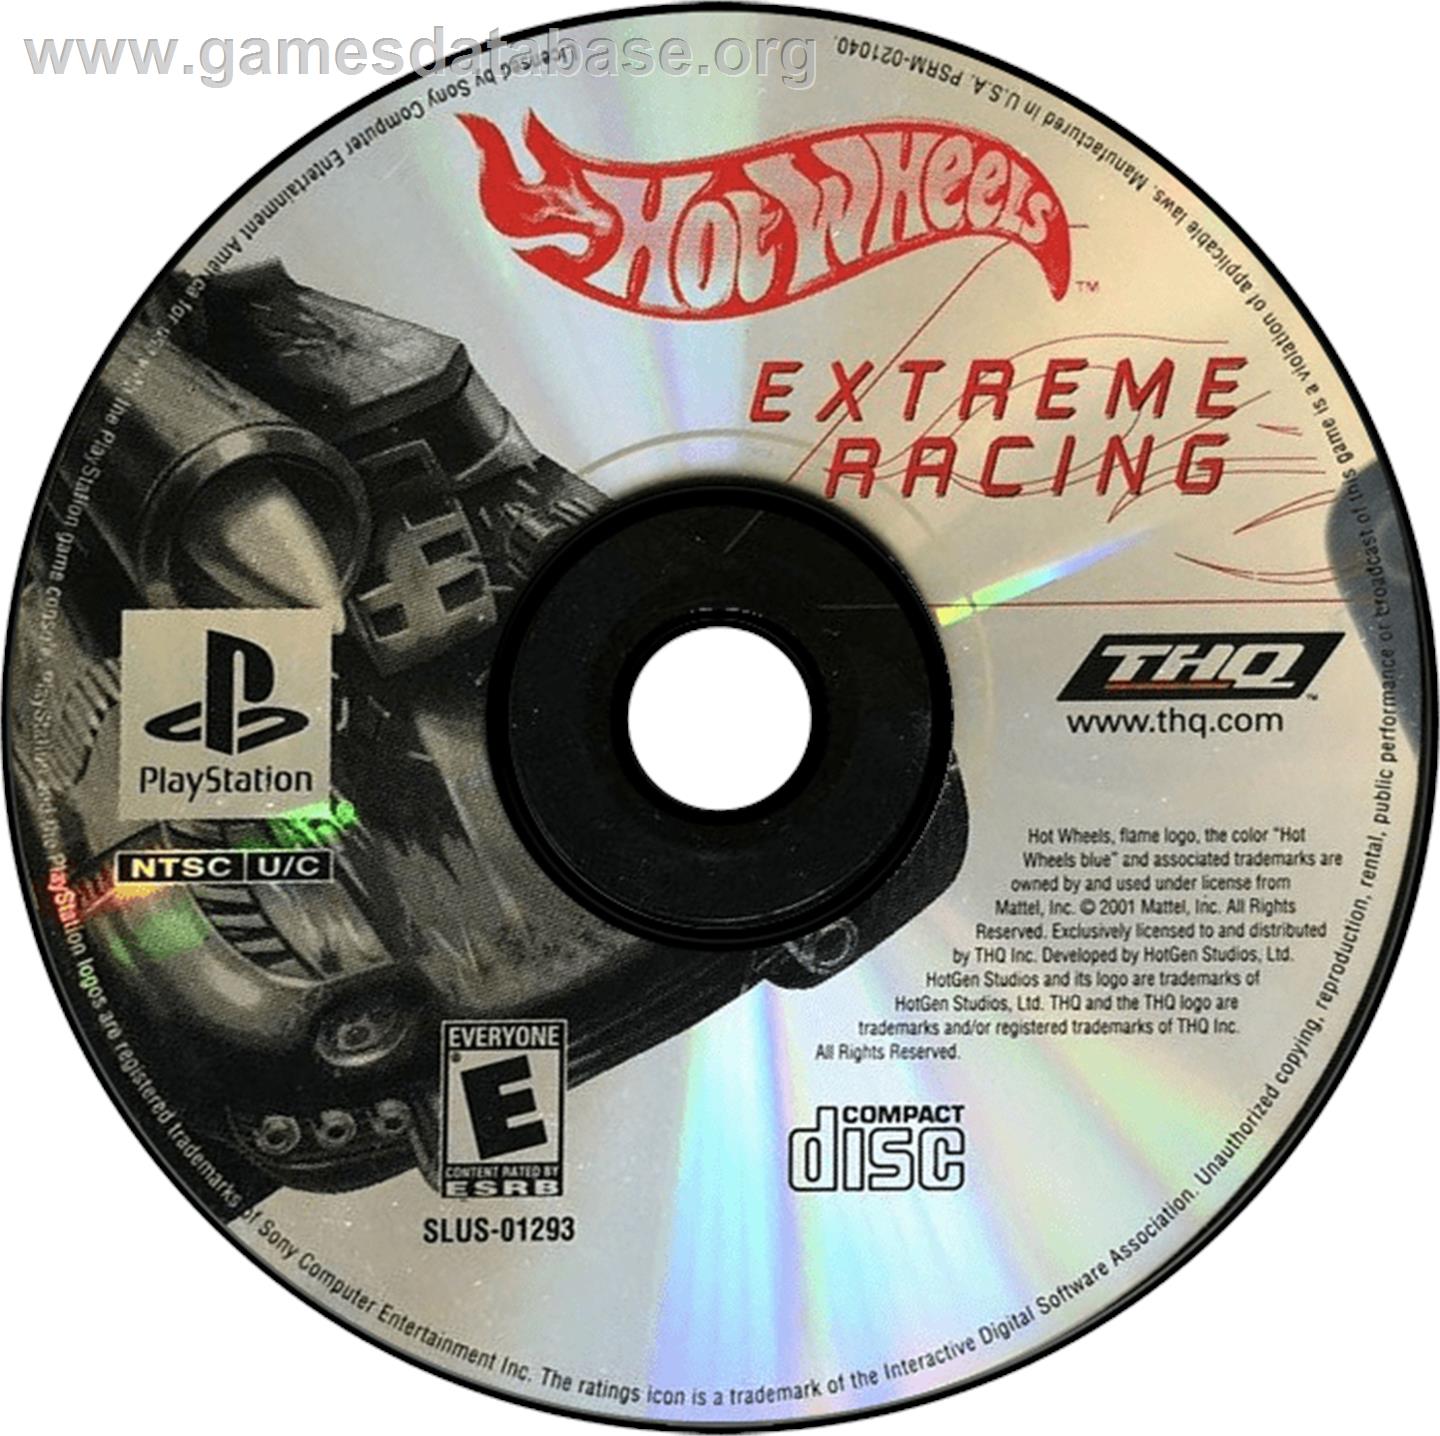 Hot Wheels: Extreme Racing - Sony Playstation - Artwork - Disc